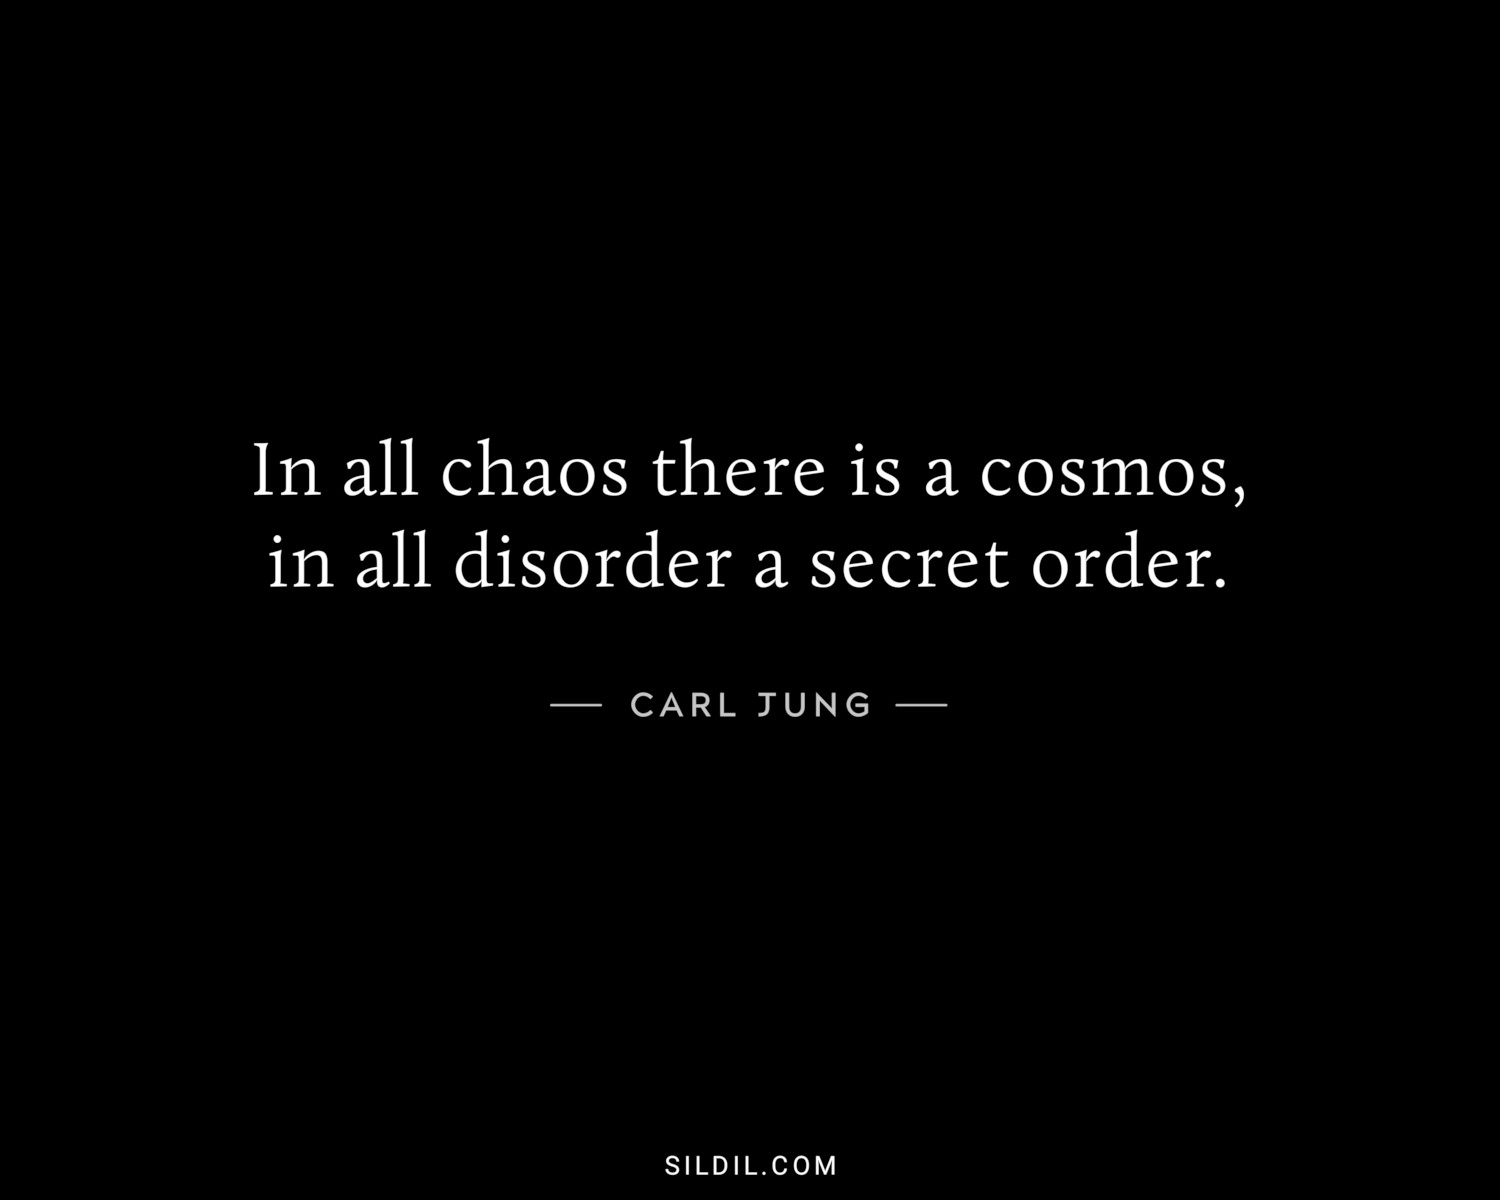 In all chaos there is a cosmos, in all disorder a secret order.